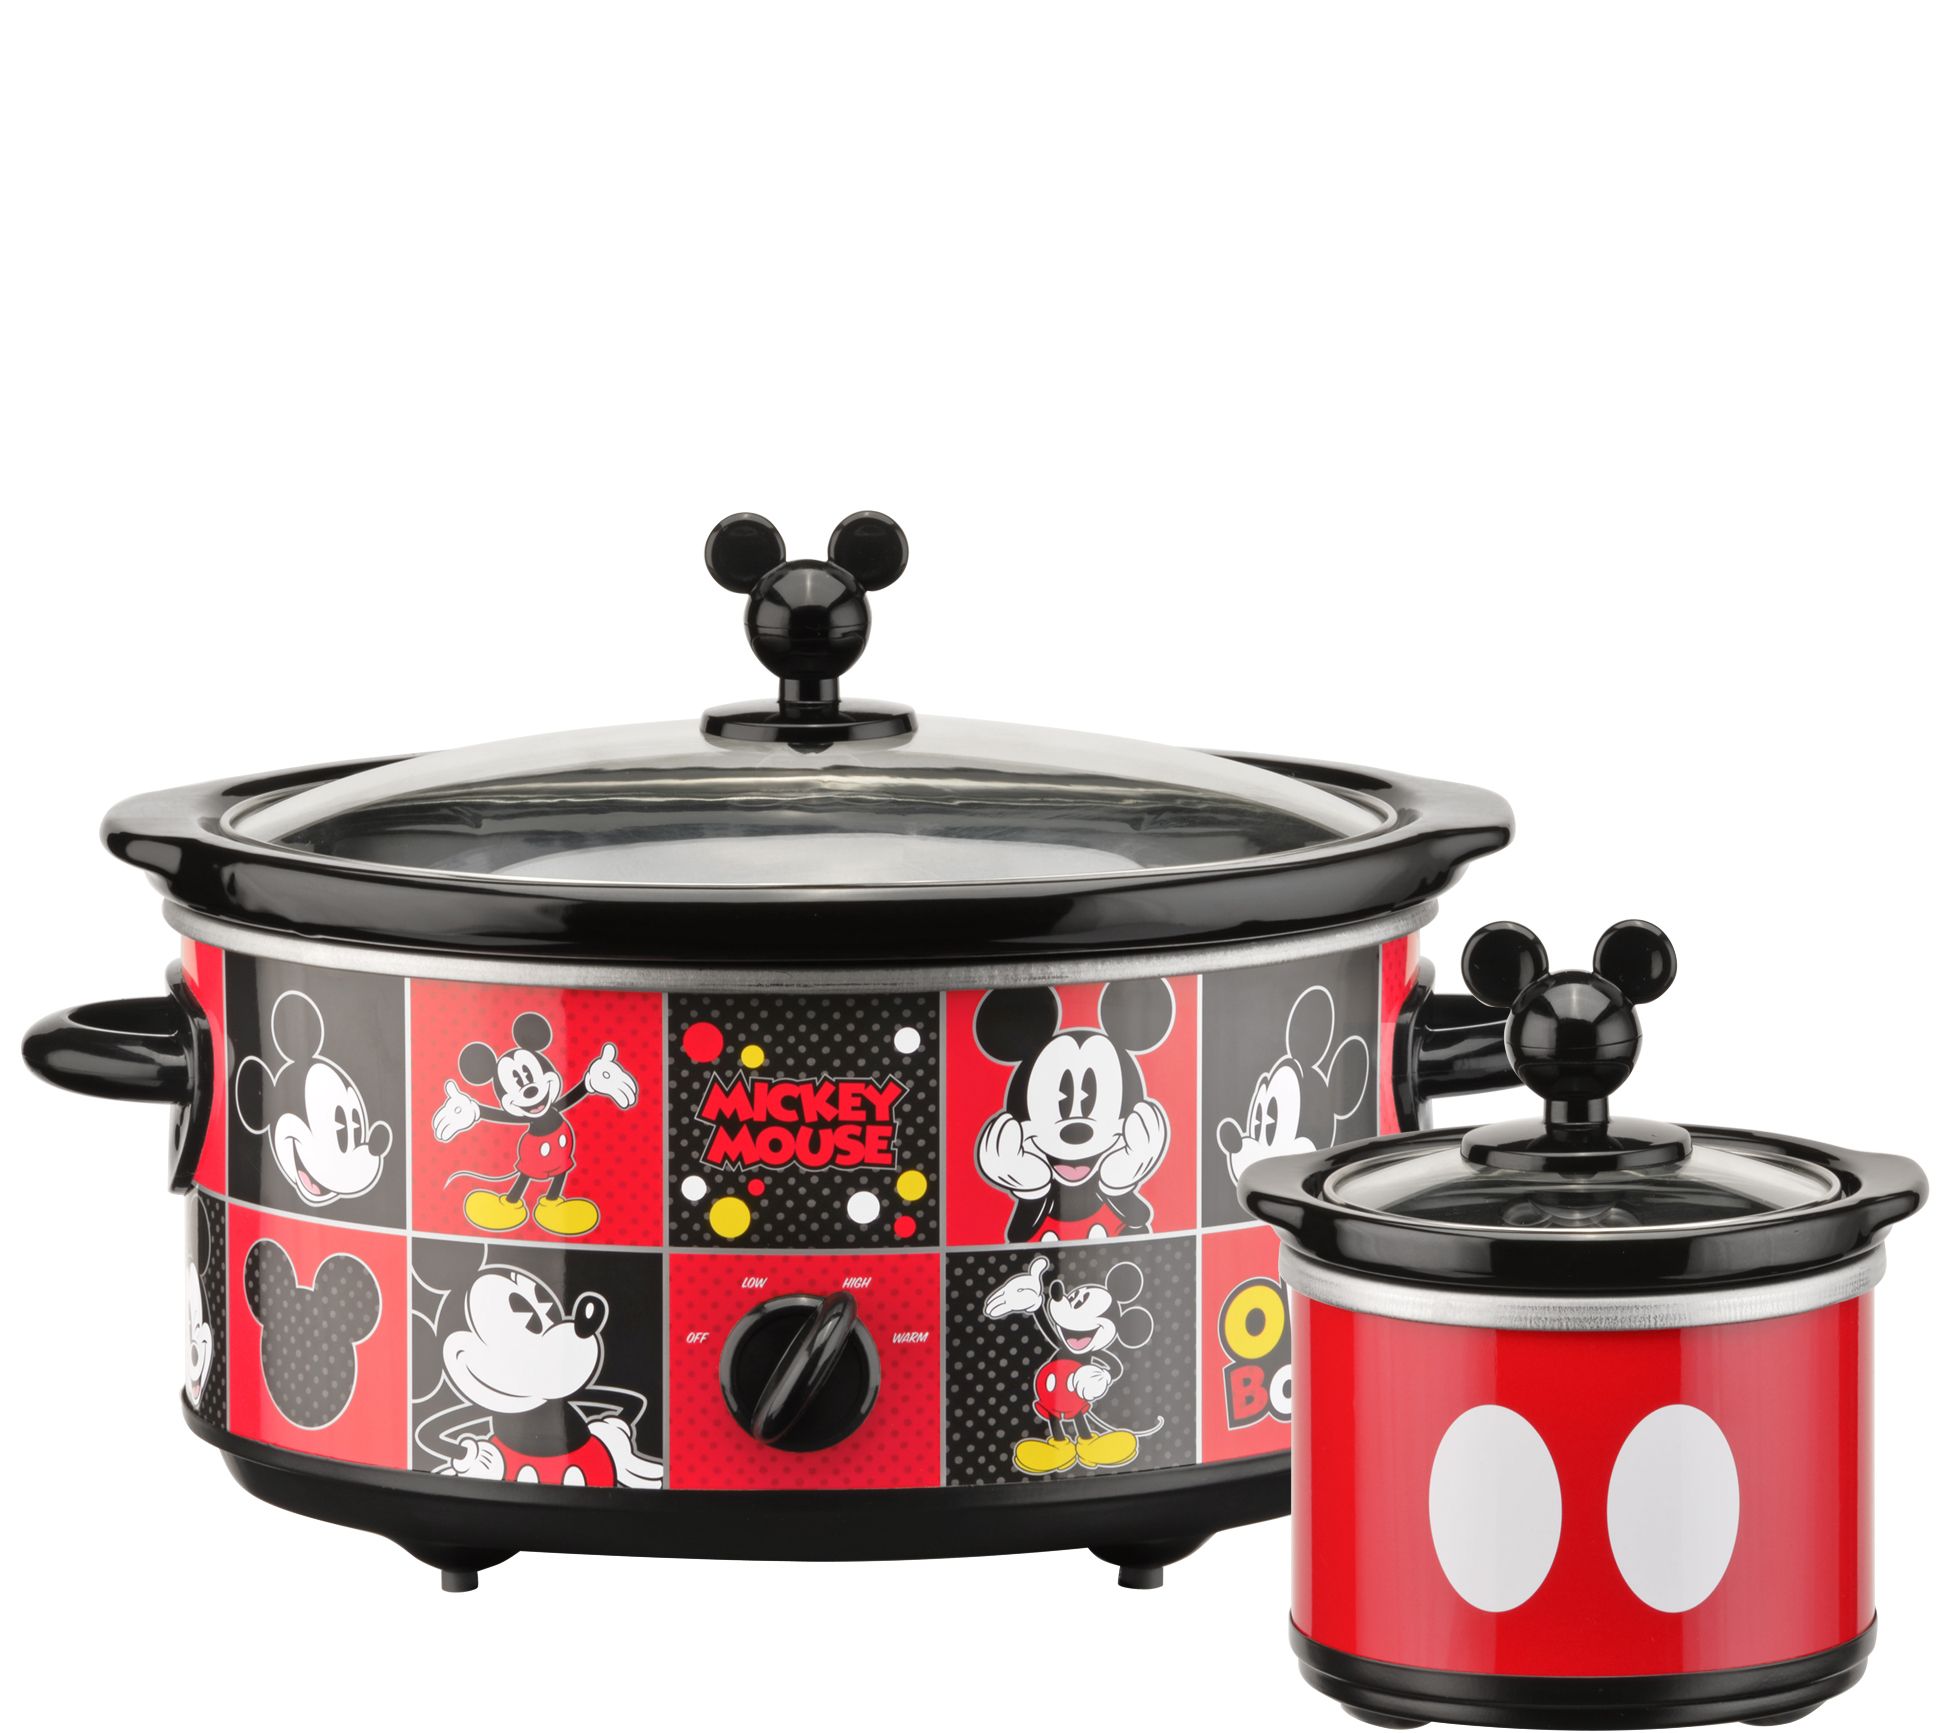 Disney Toy Story 5 Qt Slow Cooker With 20 Oz Dipper DTS-502, Color